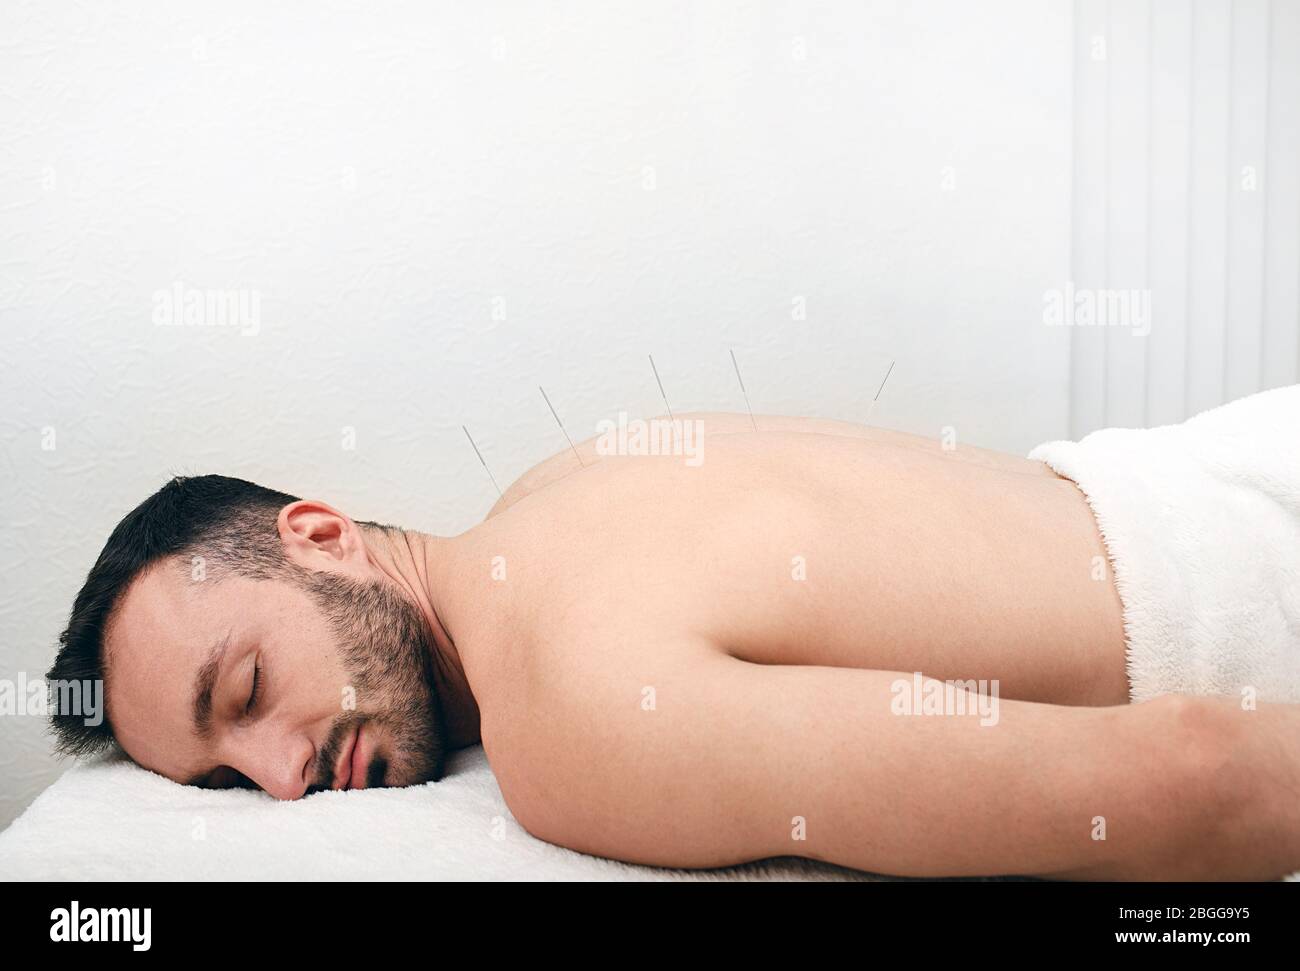 Man caucasian race getting acupuncture treatment. Acupuncture needles close up. Relax in the spa Stock Photo